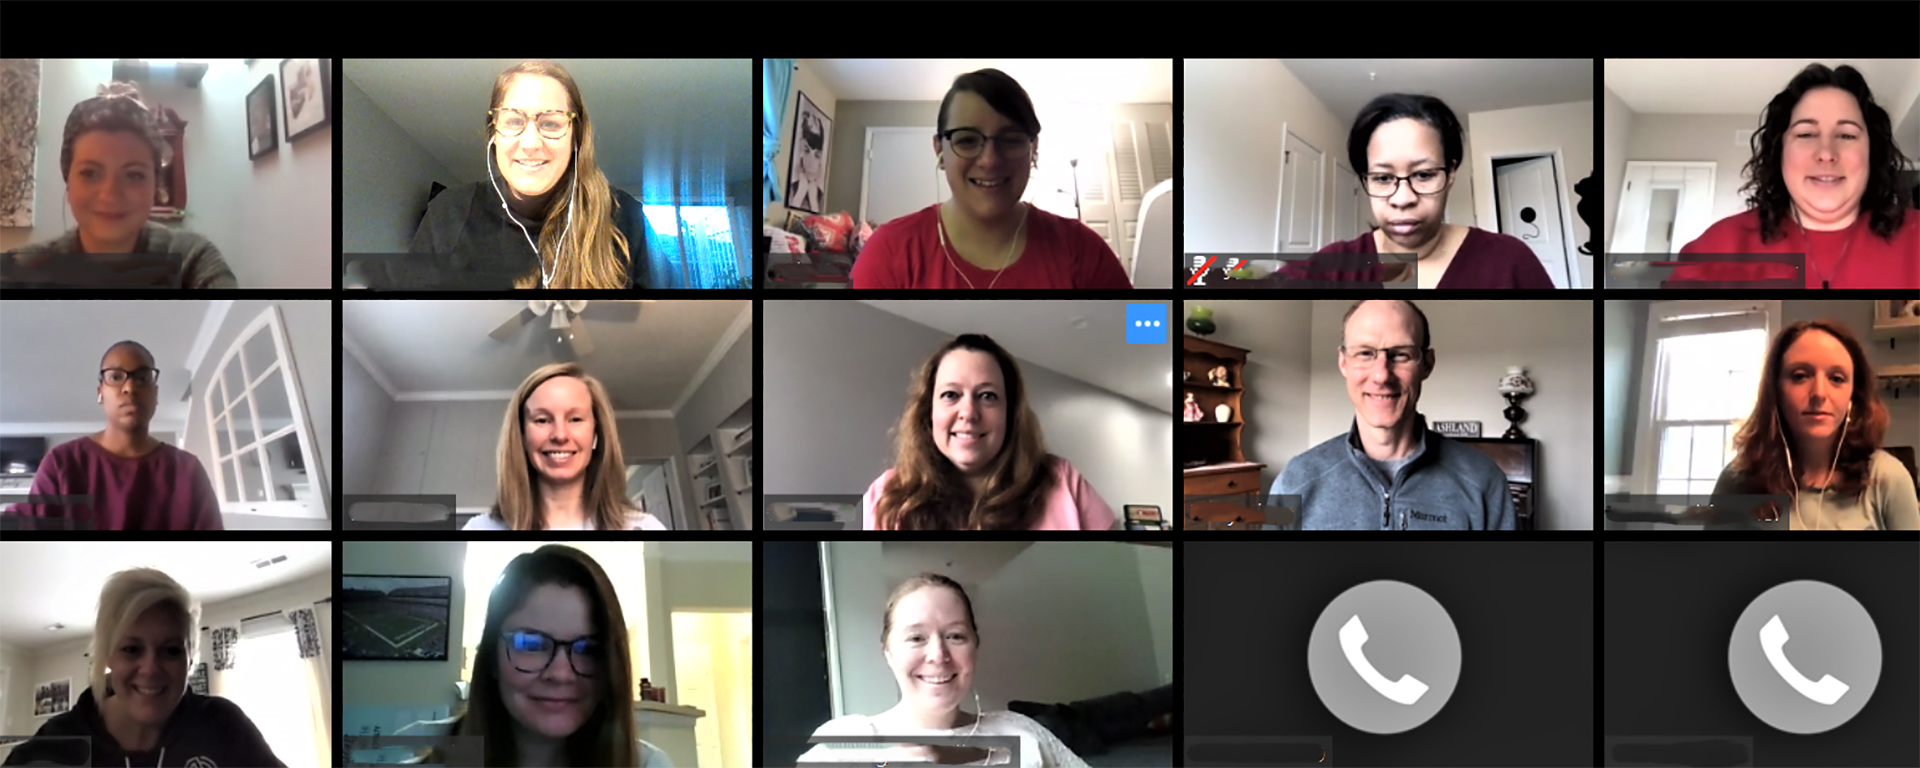 Capital One Talent Marketing team navigates working from home and holding virtual meetings